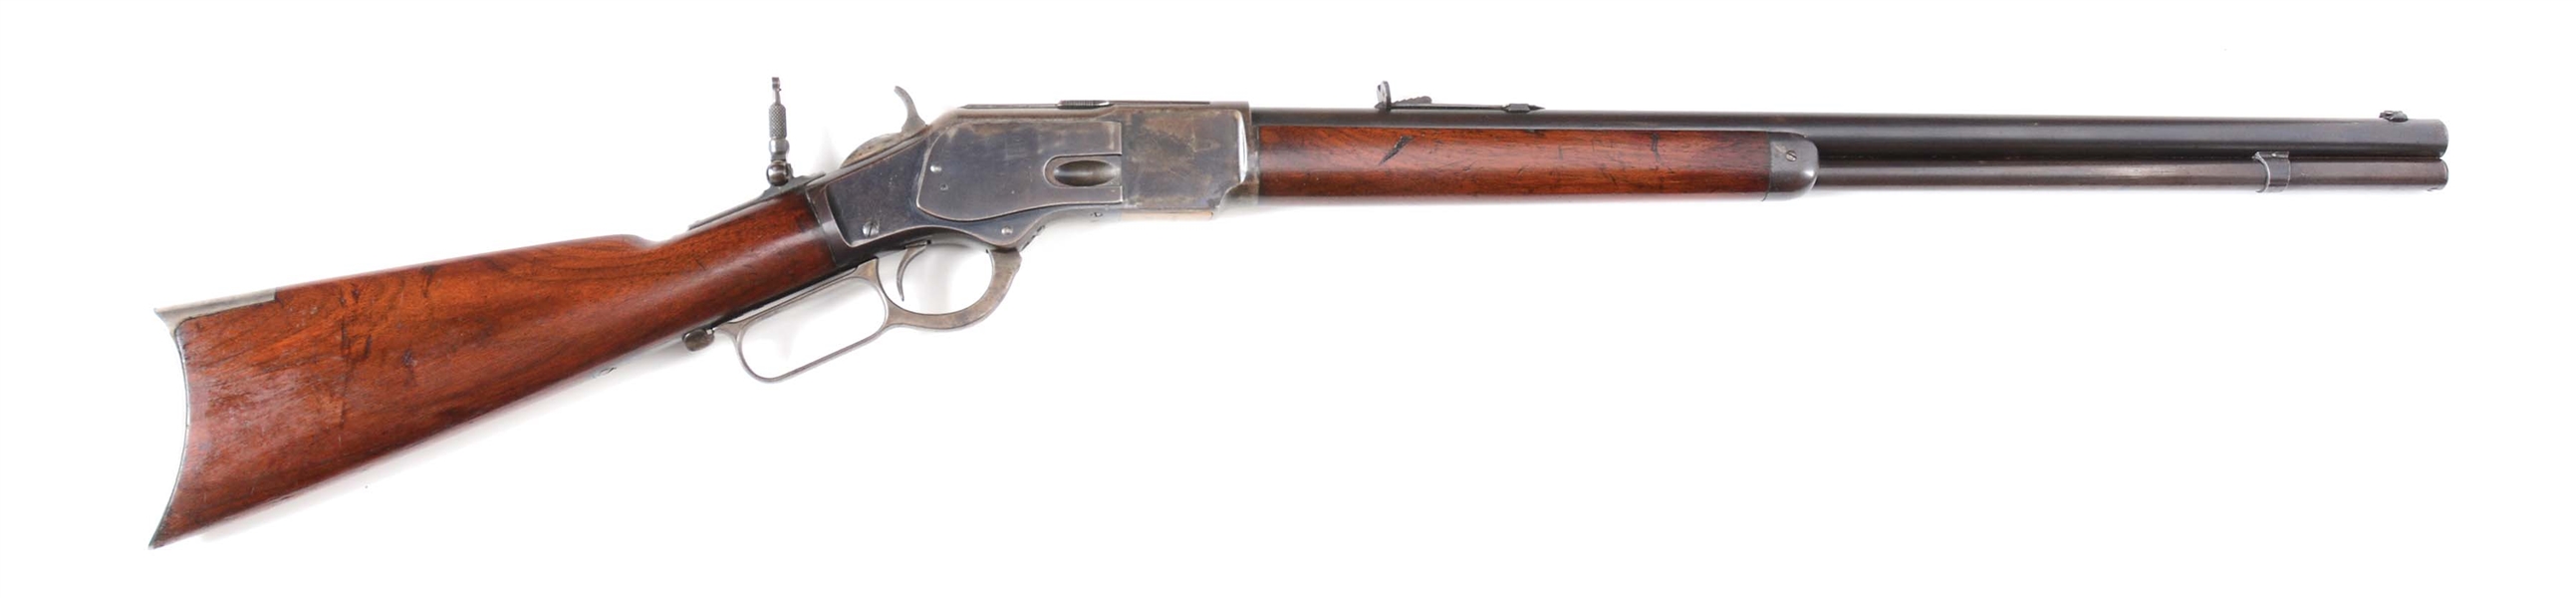 (C) WINCHESTER MODEL 1873 .44-40 LEVER ACTION RIFLE (1900).